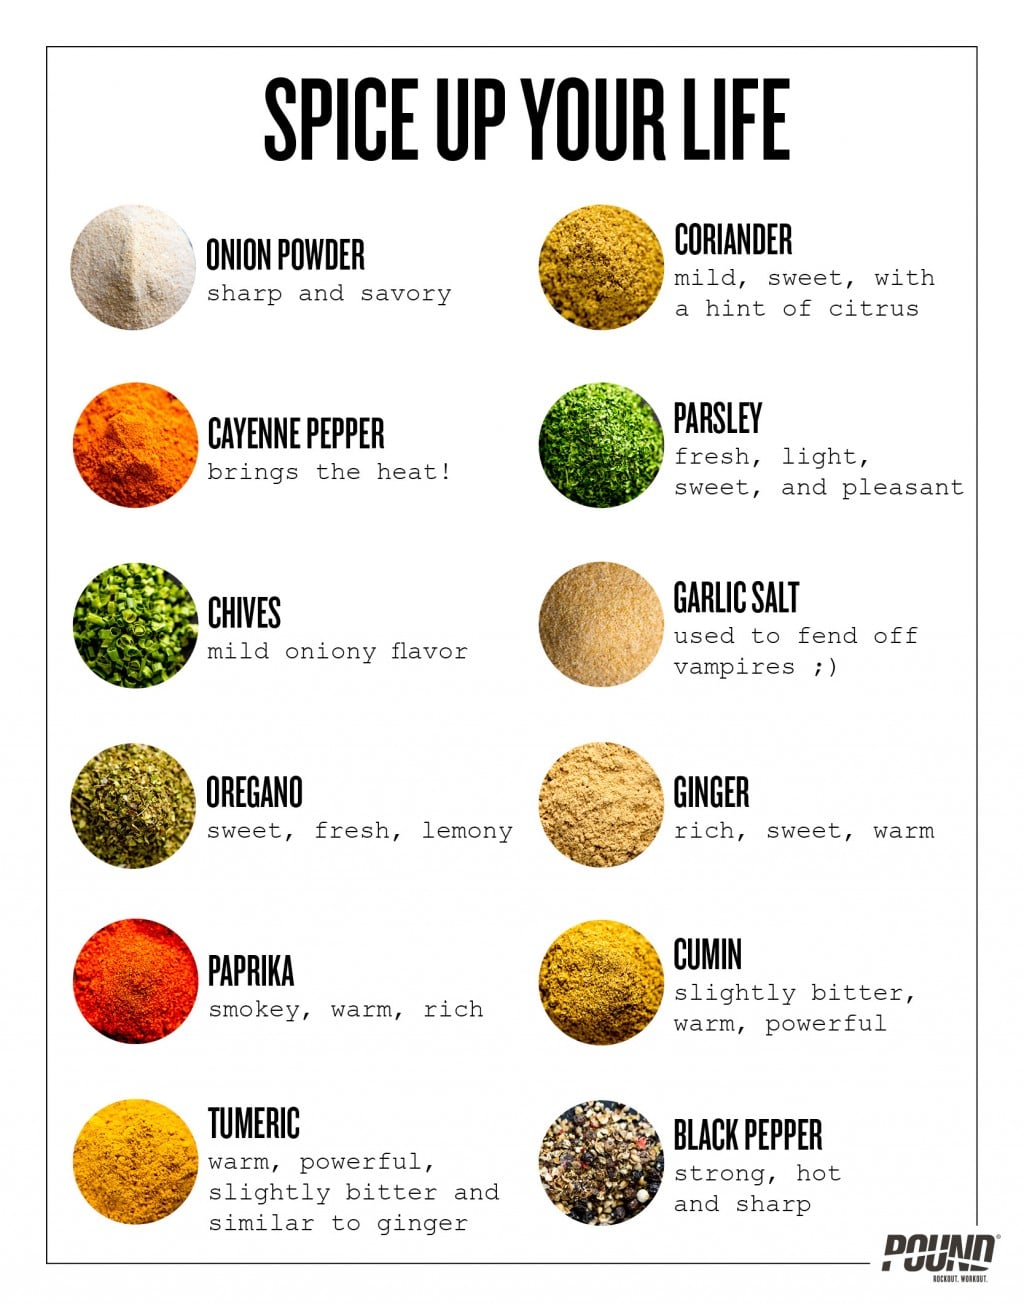 Spice up your life with these spice combos and learn more about those spices piled up in your cabinet.